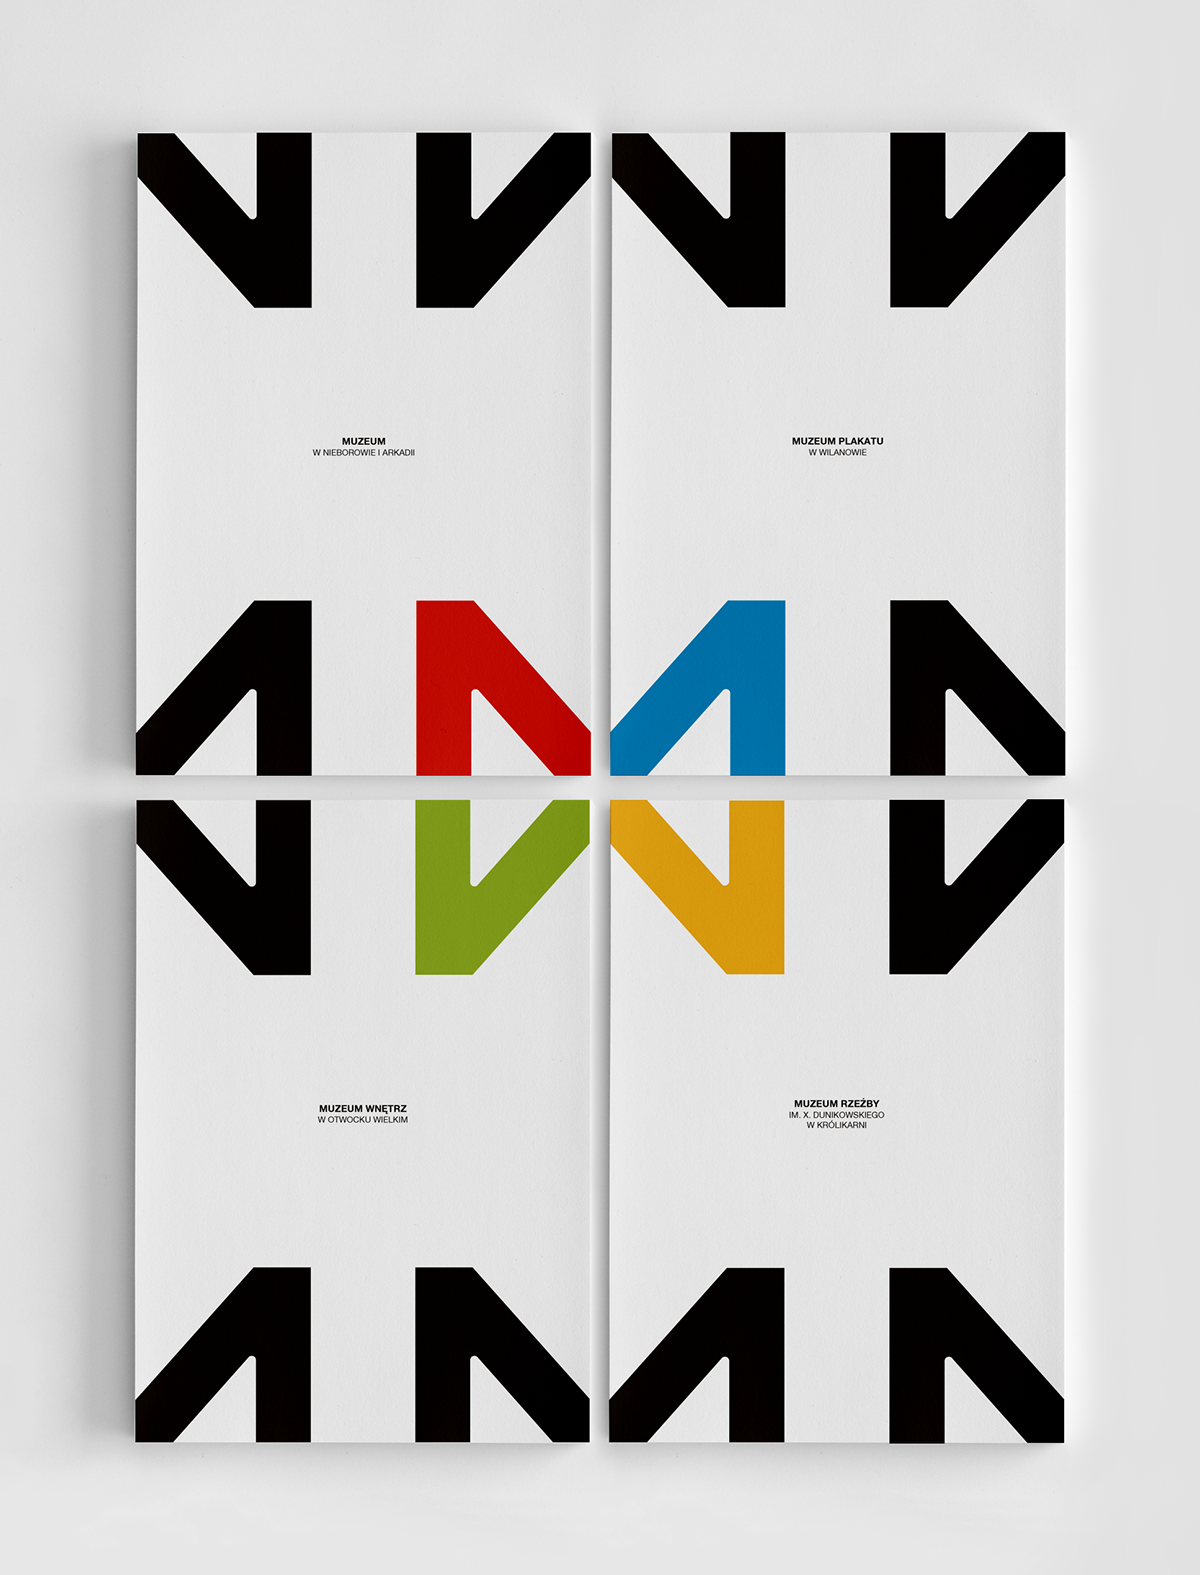 warsaw poland mnw national culture print poster identity national institution branches visual ID Corporate Identity DAWID CMOK katowice silesia